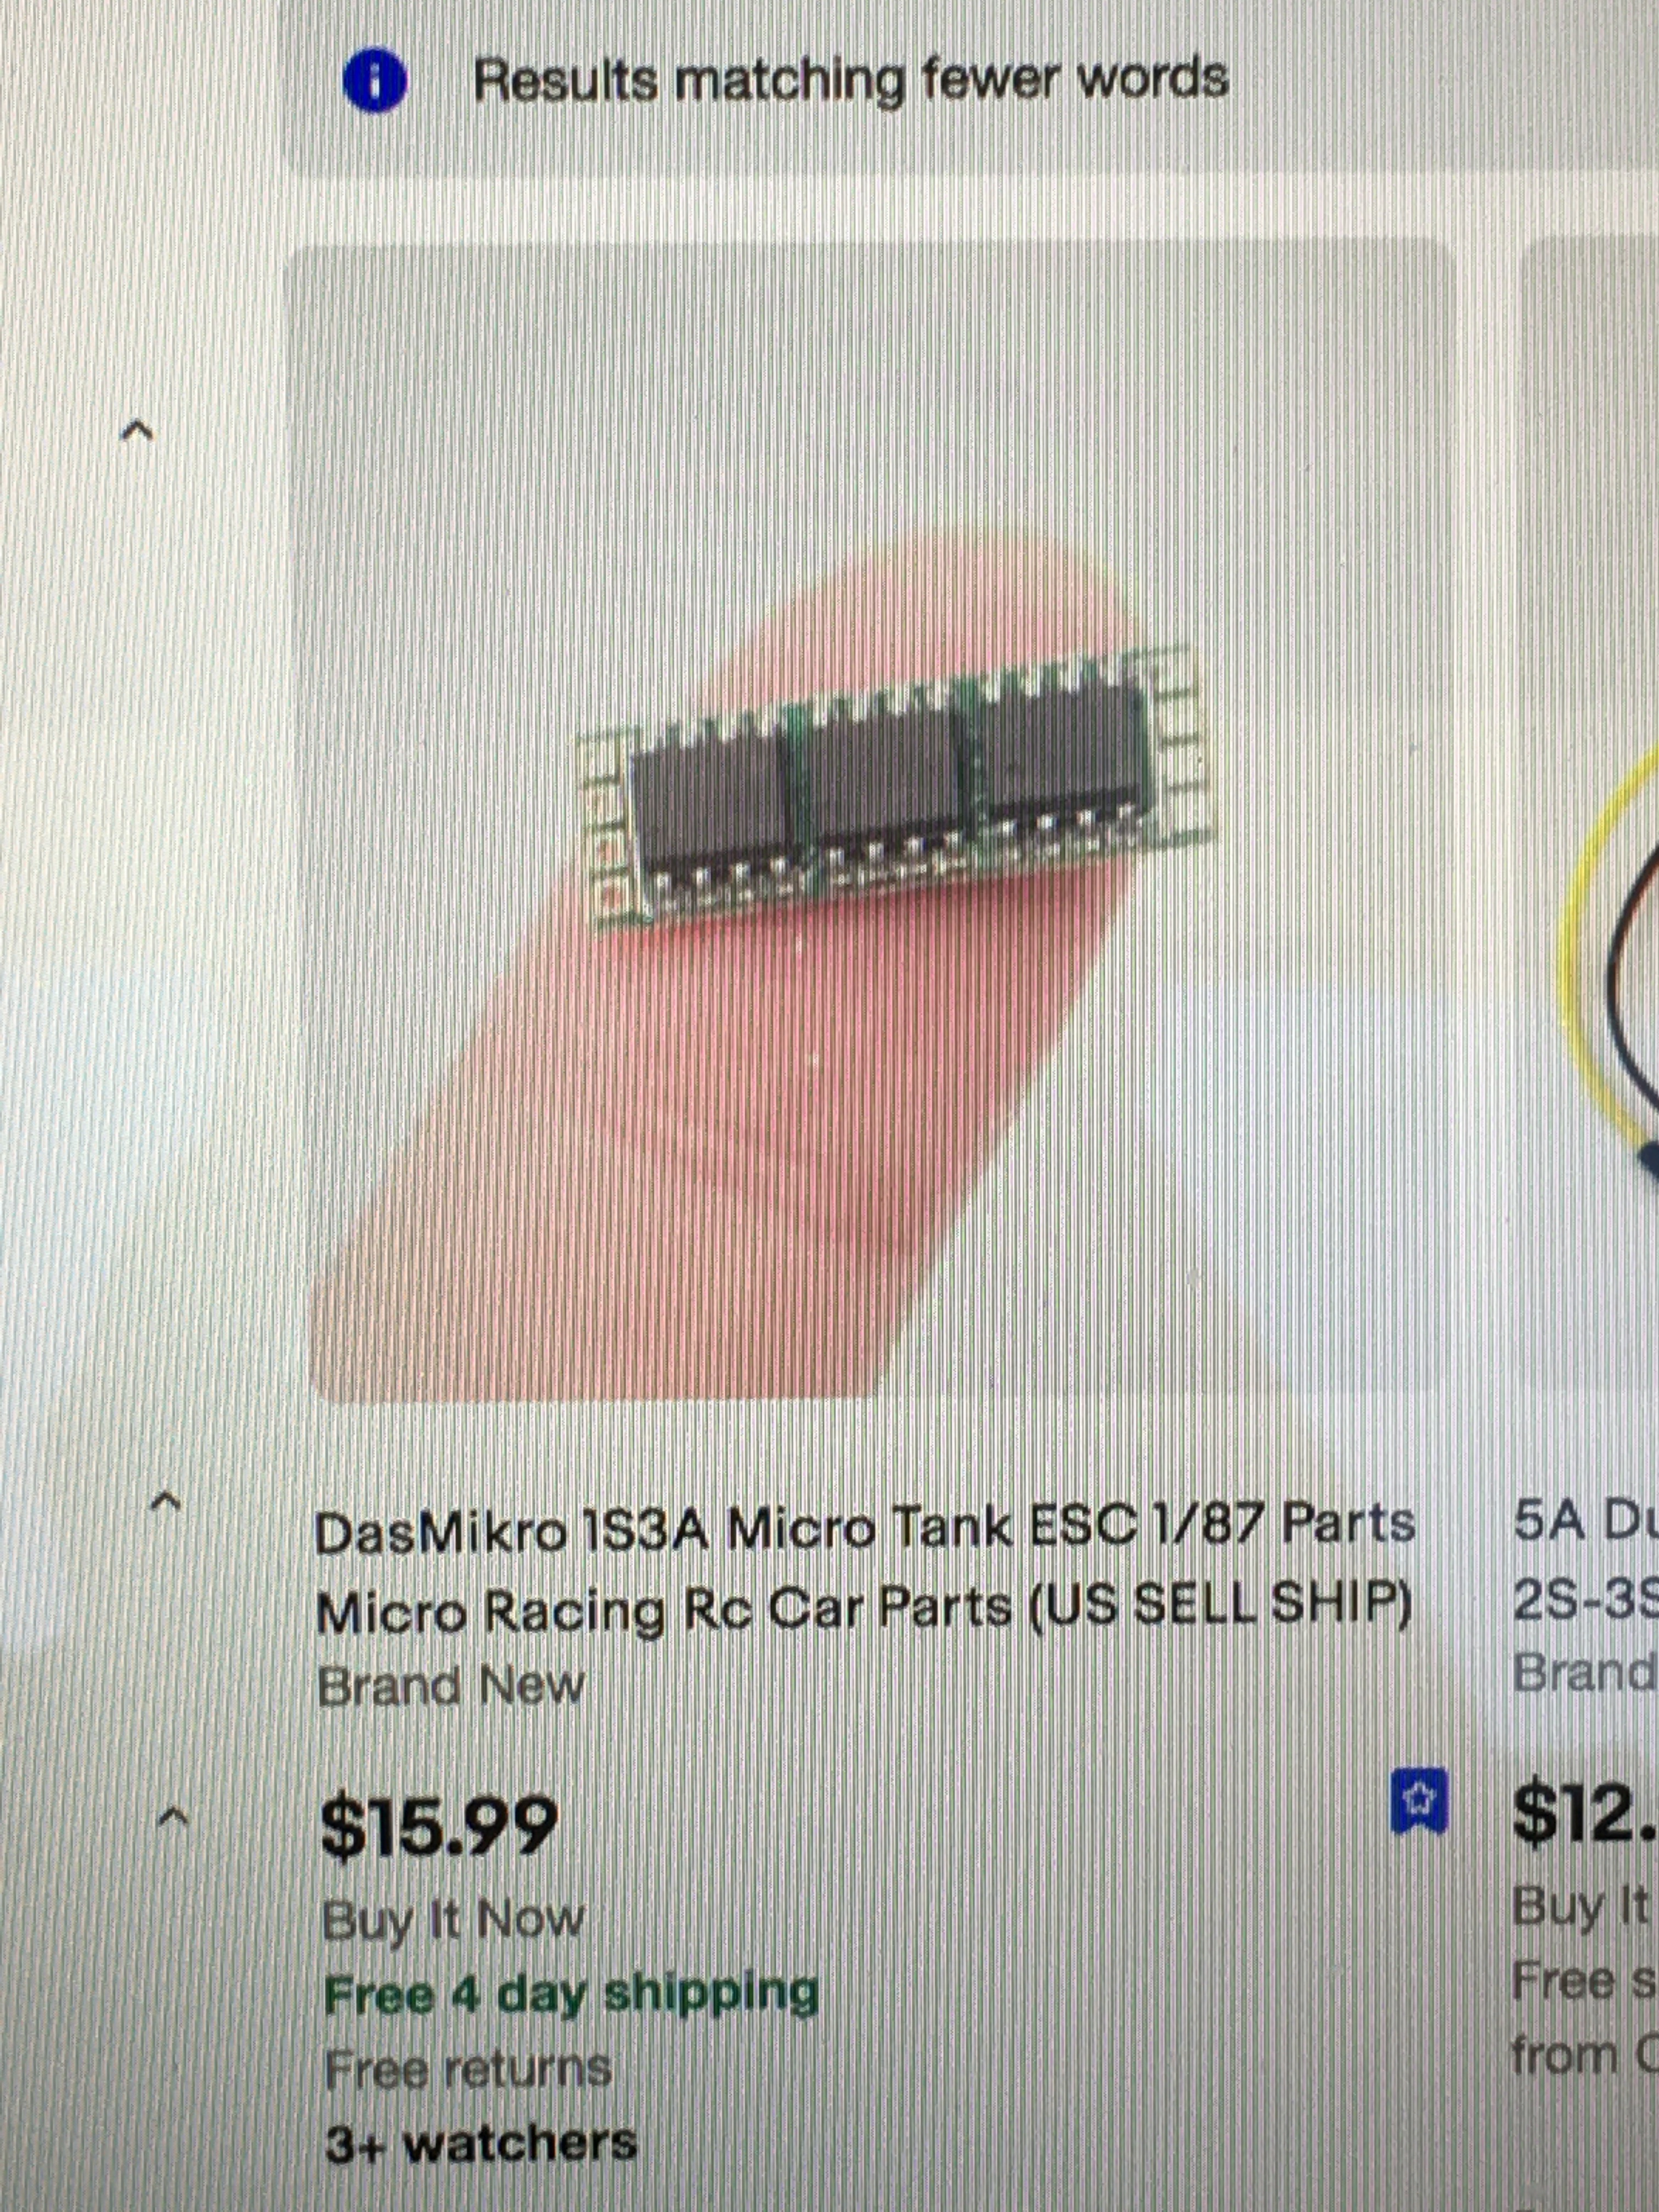 These only work with POSITIVE SHIFT 72 mhz Transmitters!!! I have not been able to get these Das Mikro ESC's to work with DSM Specktrum Transmitters!!!